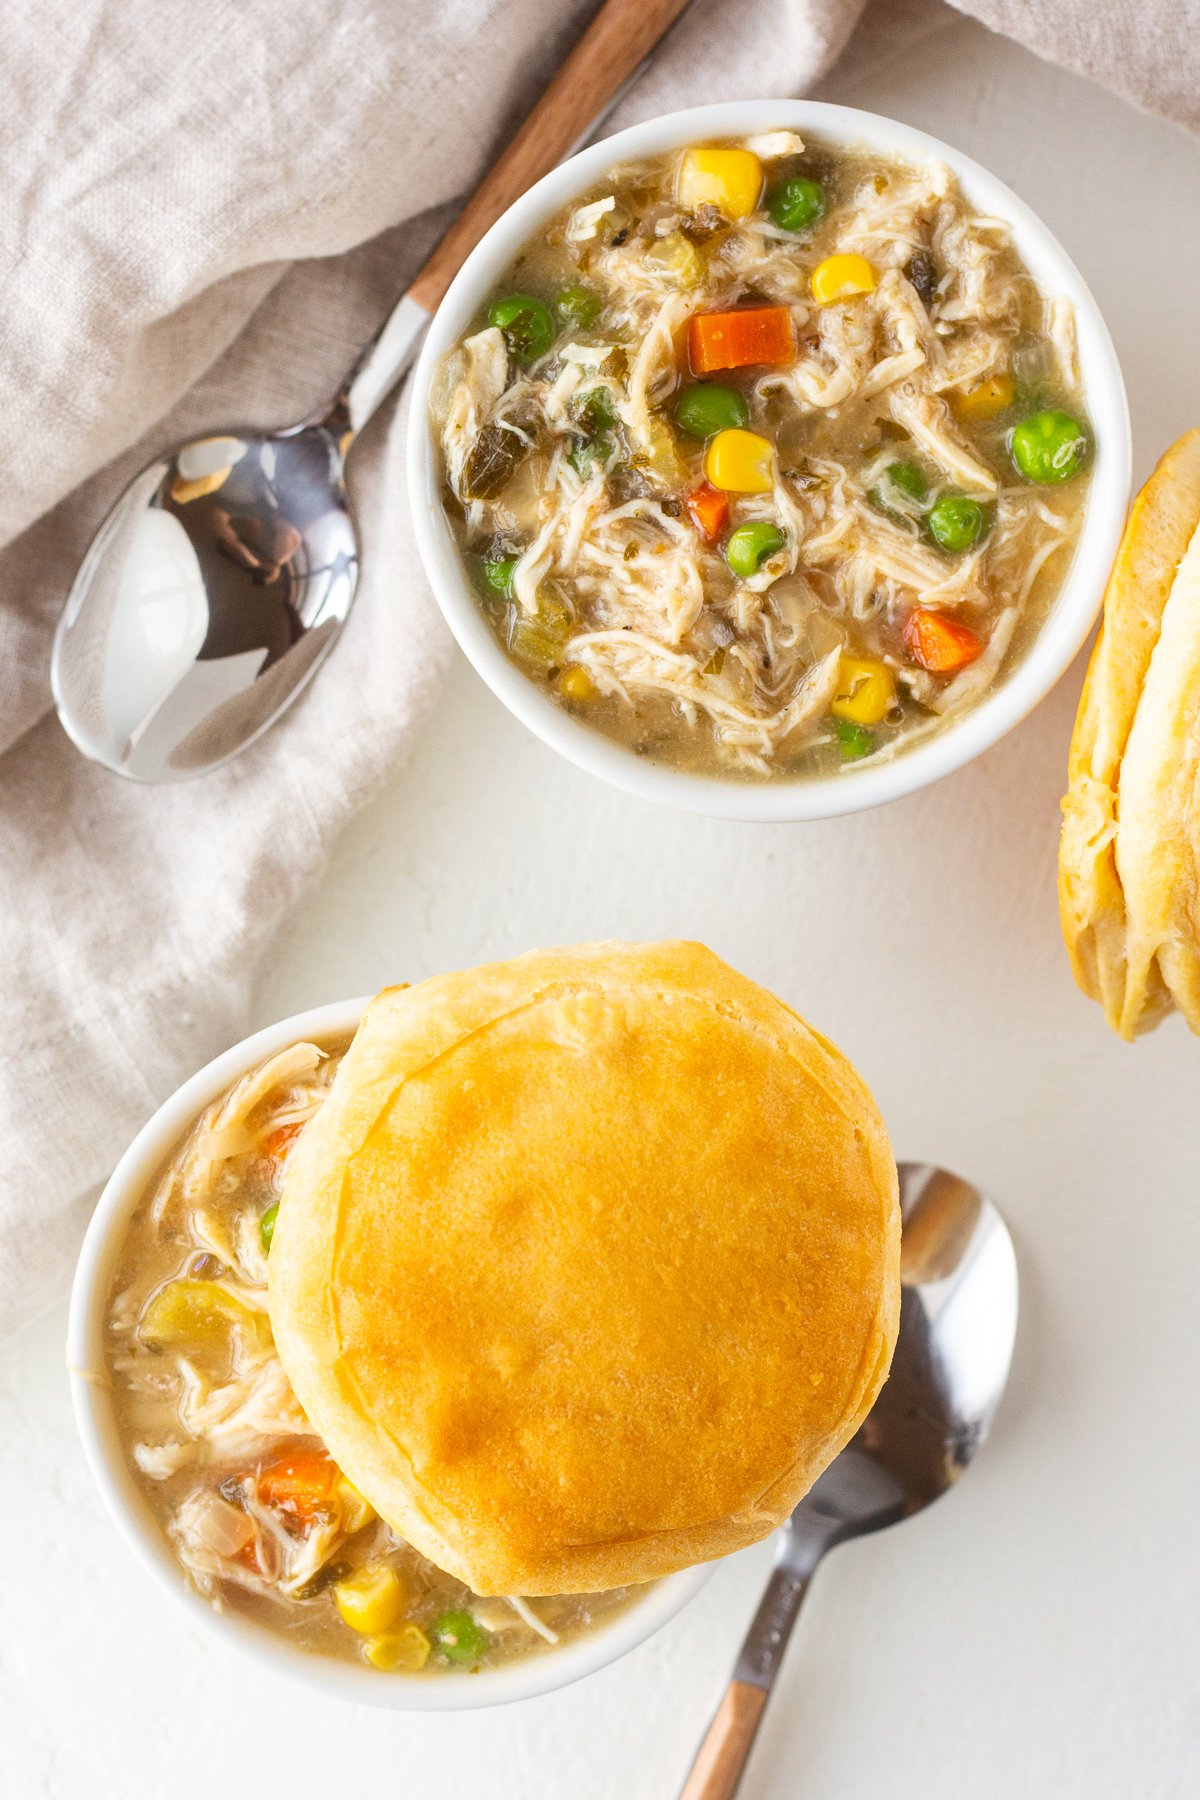 Top view of two bowls filled with a chicken pot pie mixture, one topped with a biscuit.